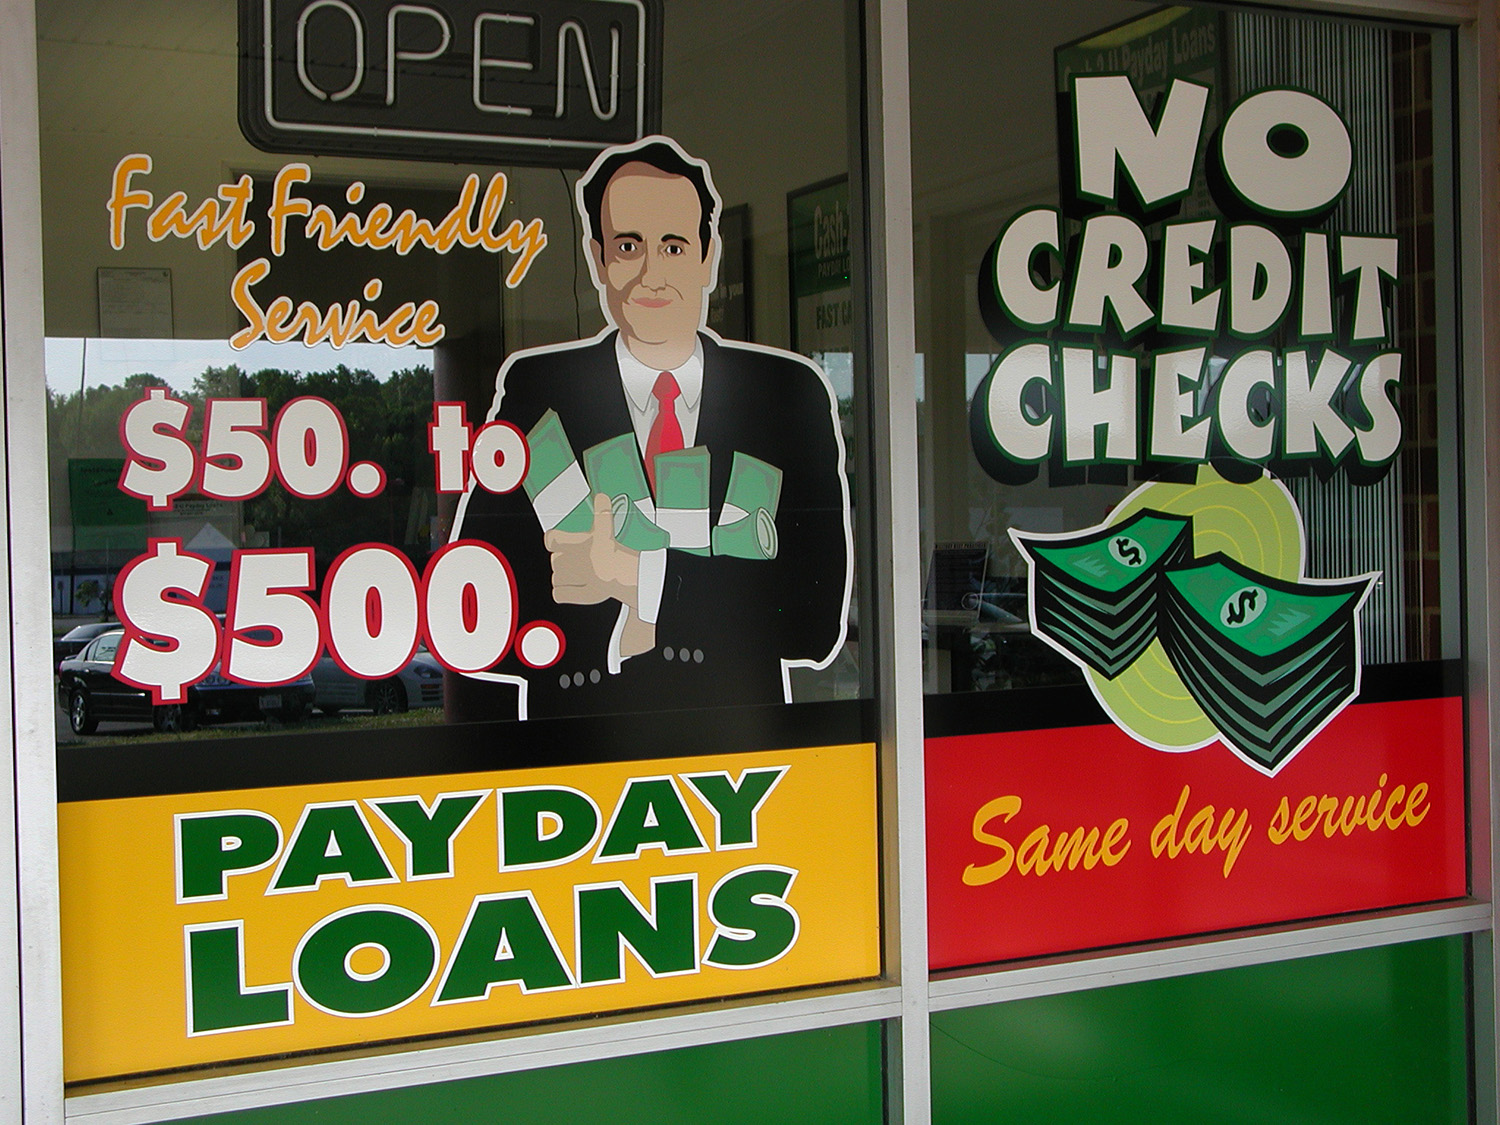 Payday lending has become increasingly the target of faith-based groups.